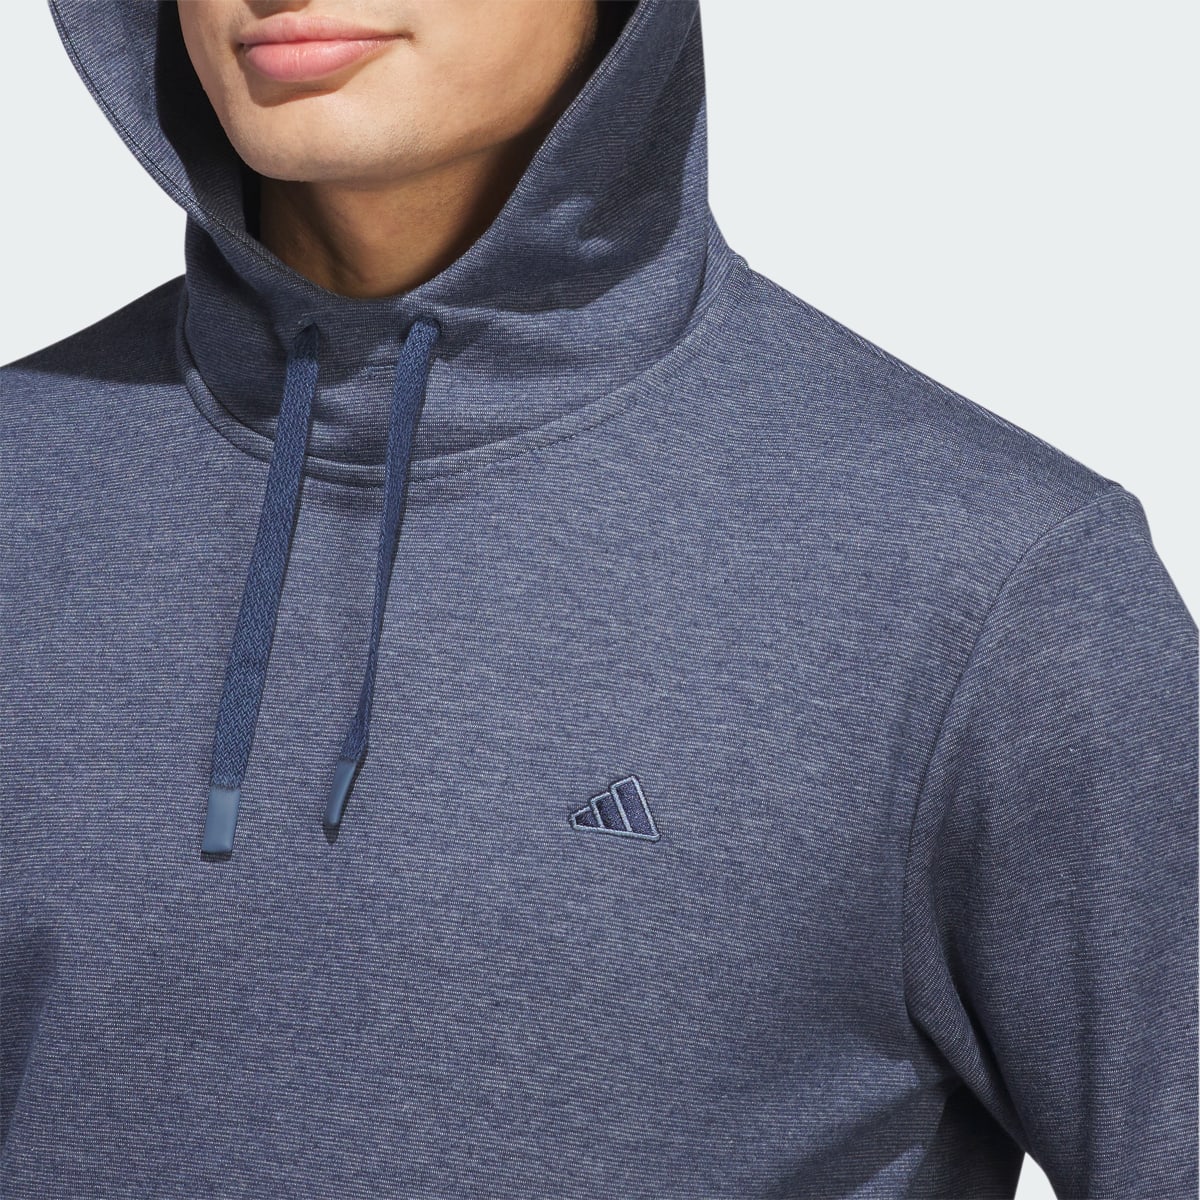 Adidas Go-To Hoodie. 6